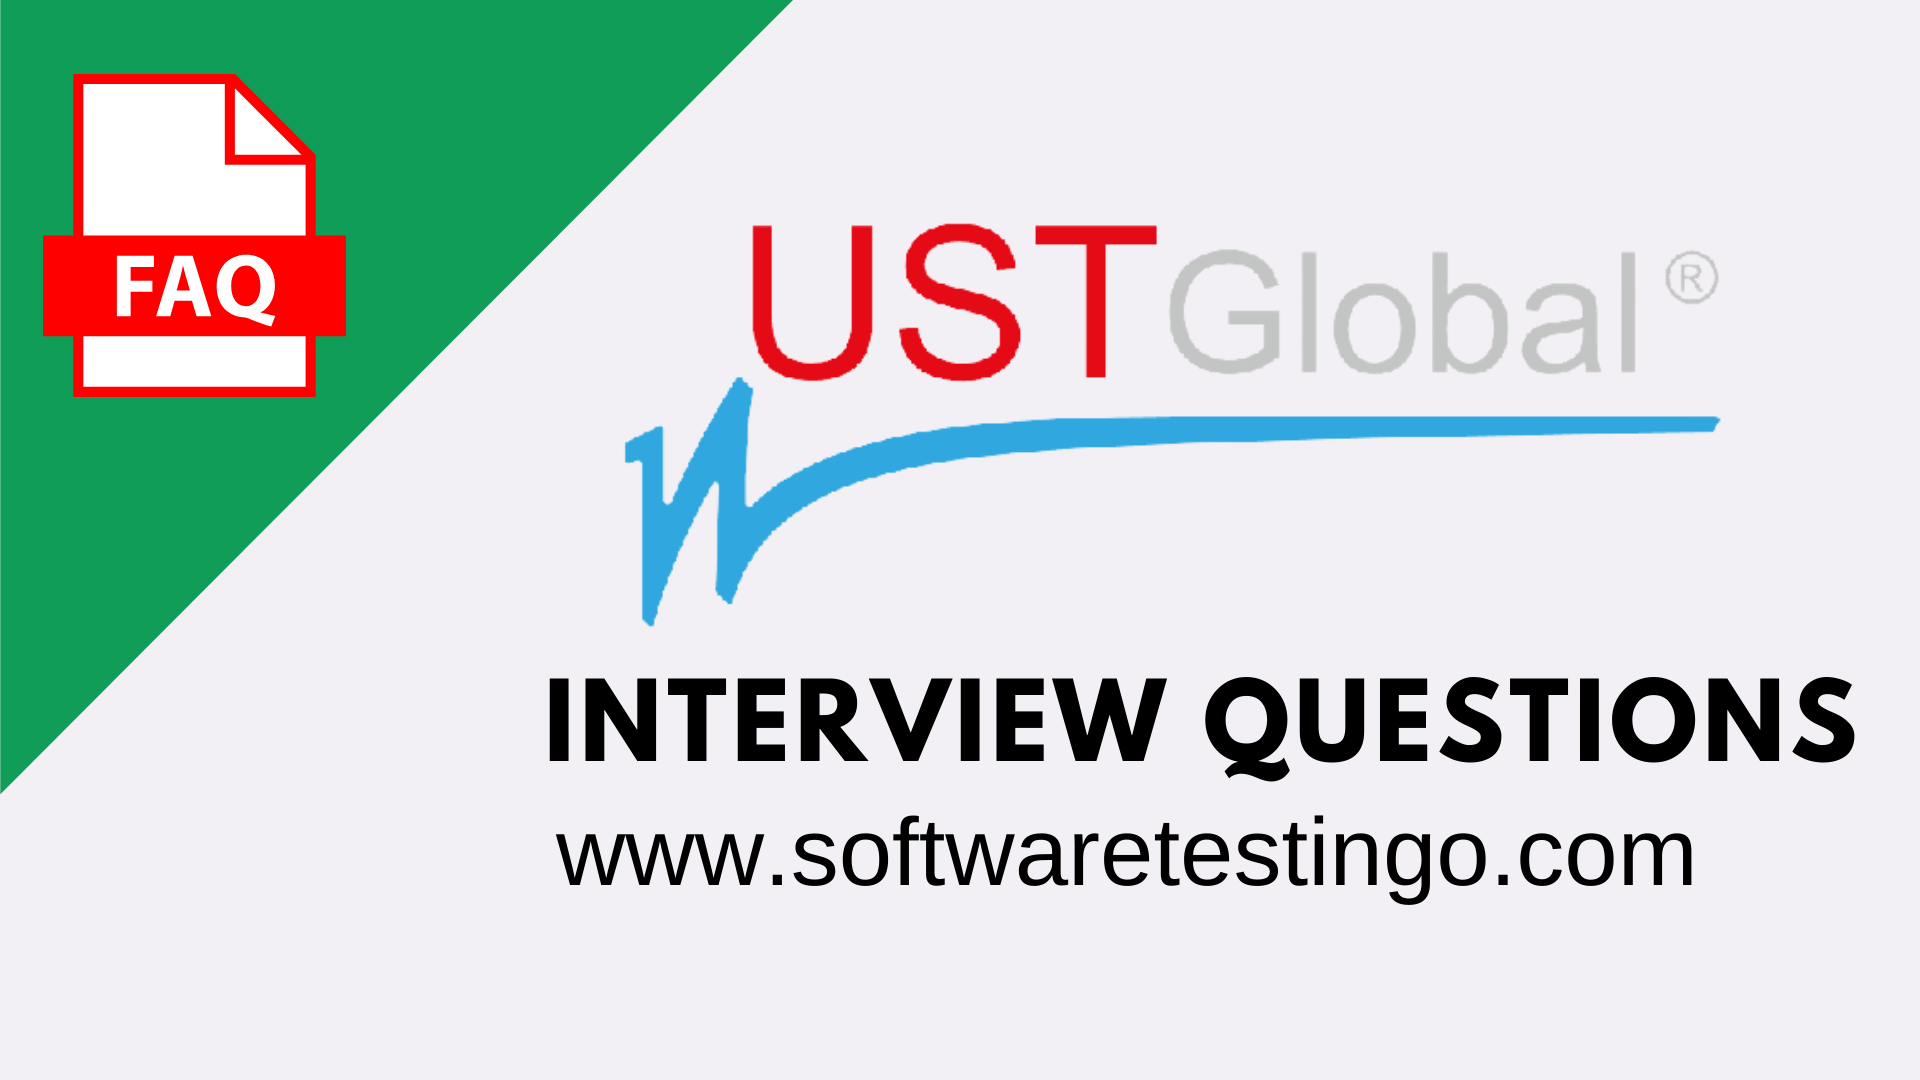 UST Global Interview Questions